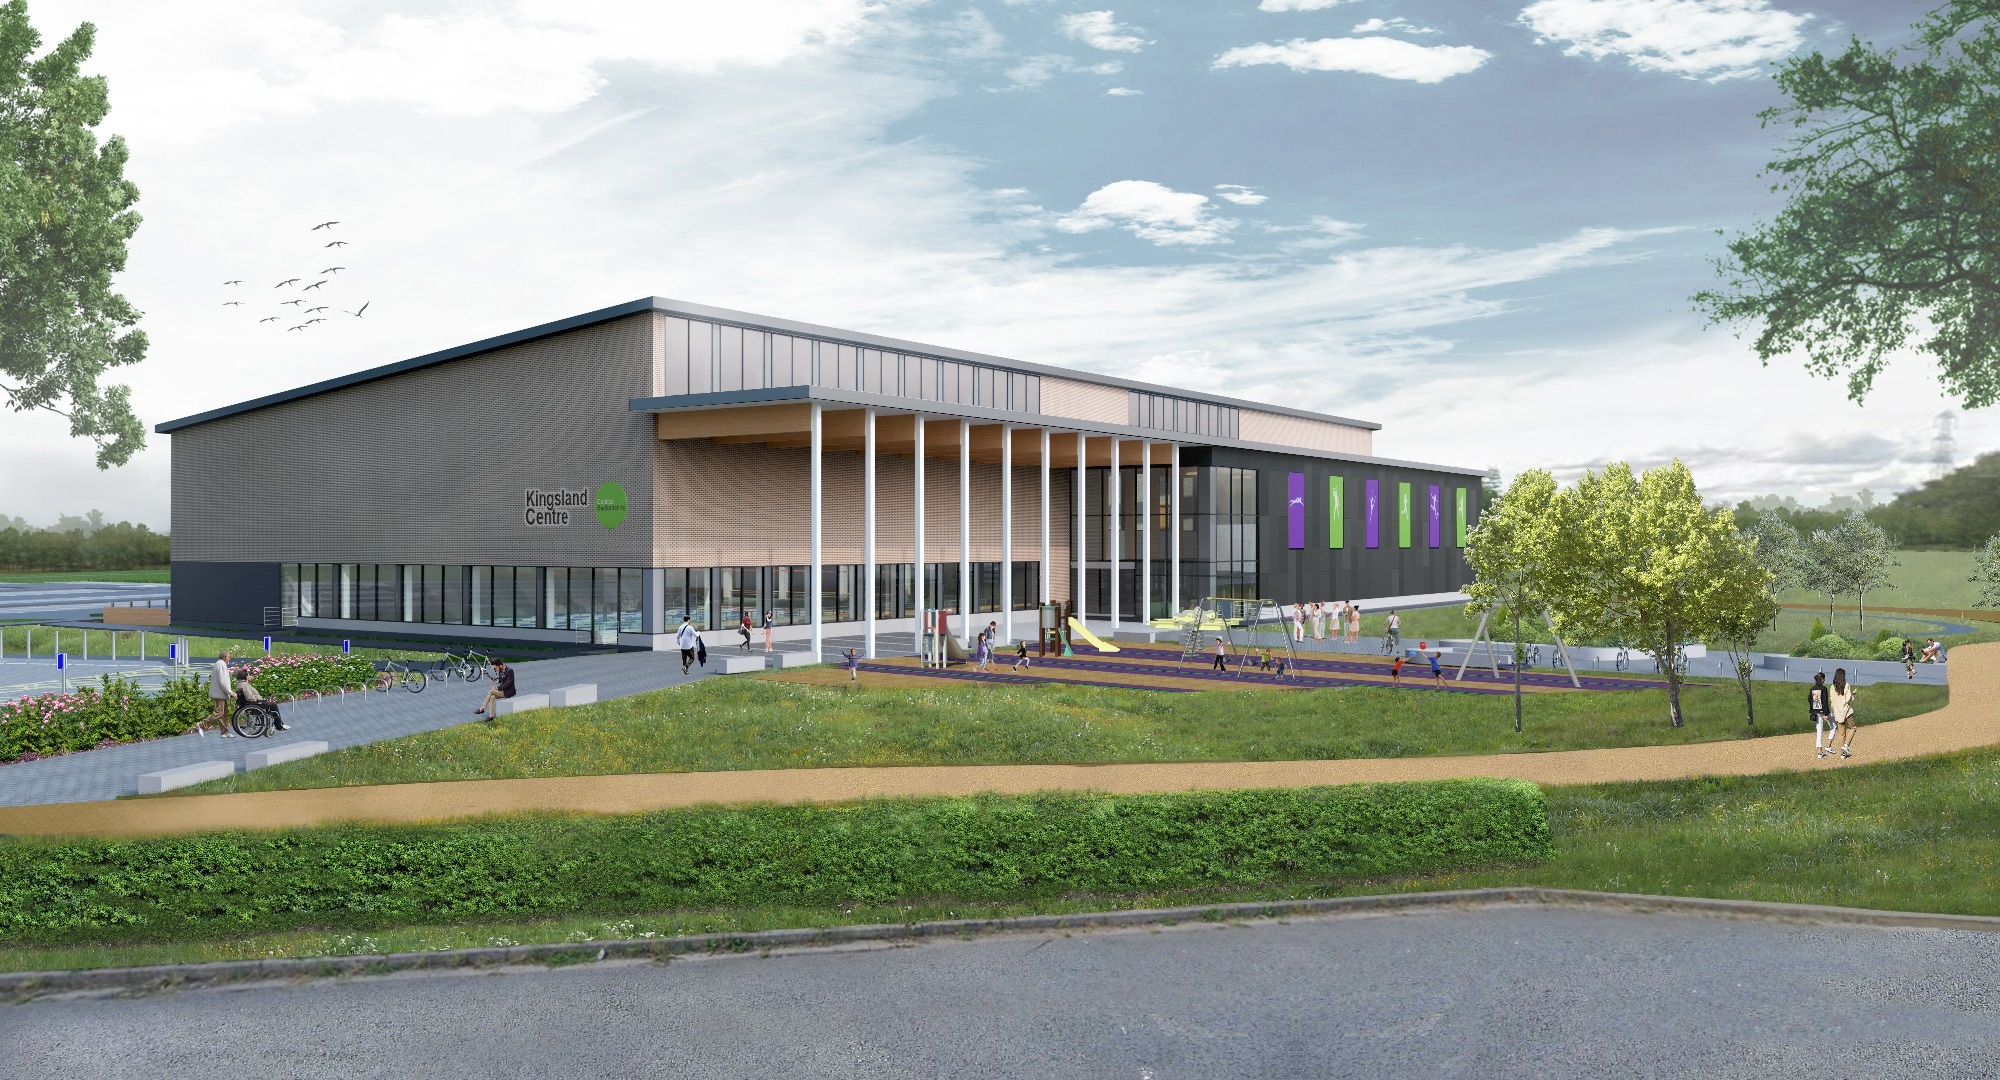 Morgan Sindall Construction Springboards Into New Community and Leisure Centre for Houghton Regis